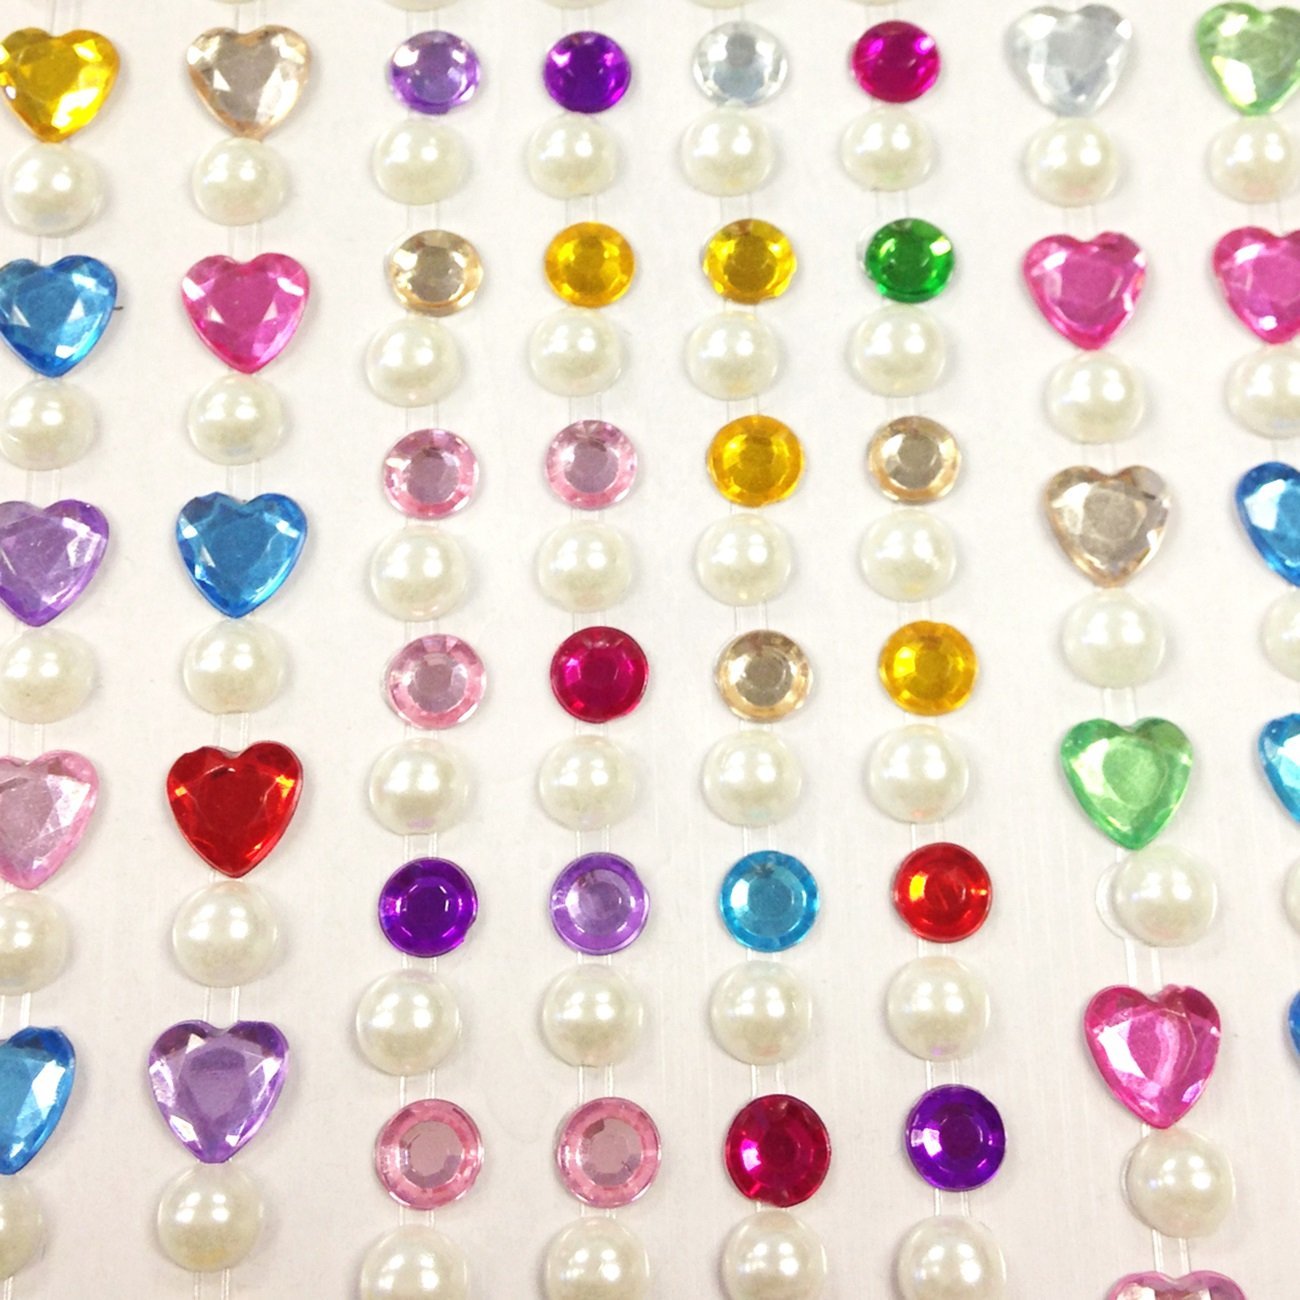 Wrapables Acrylic Self Adhesive Crystal Rhinestone Gem Stickers, Hearts Pink Blue Green